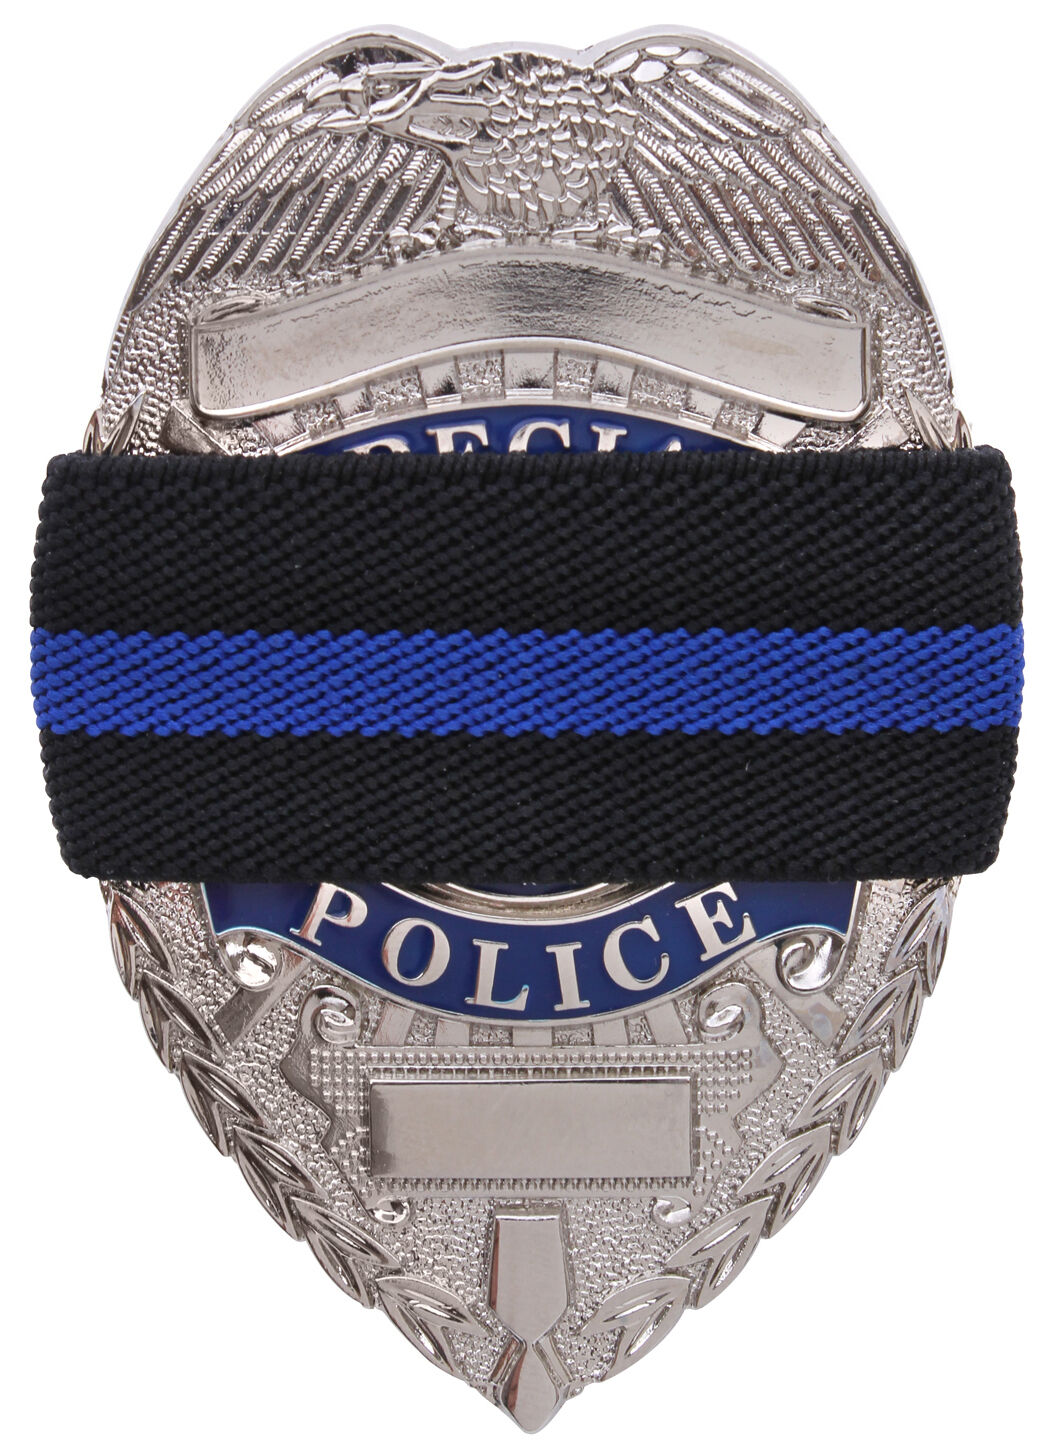 Rothco Thin Blue Line Mourning Band